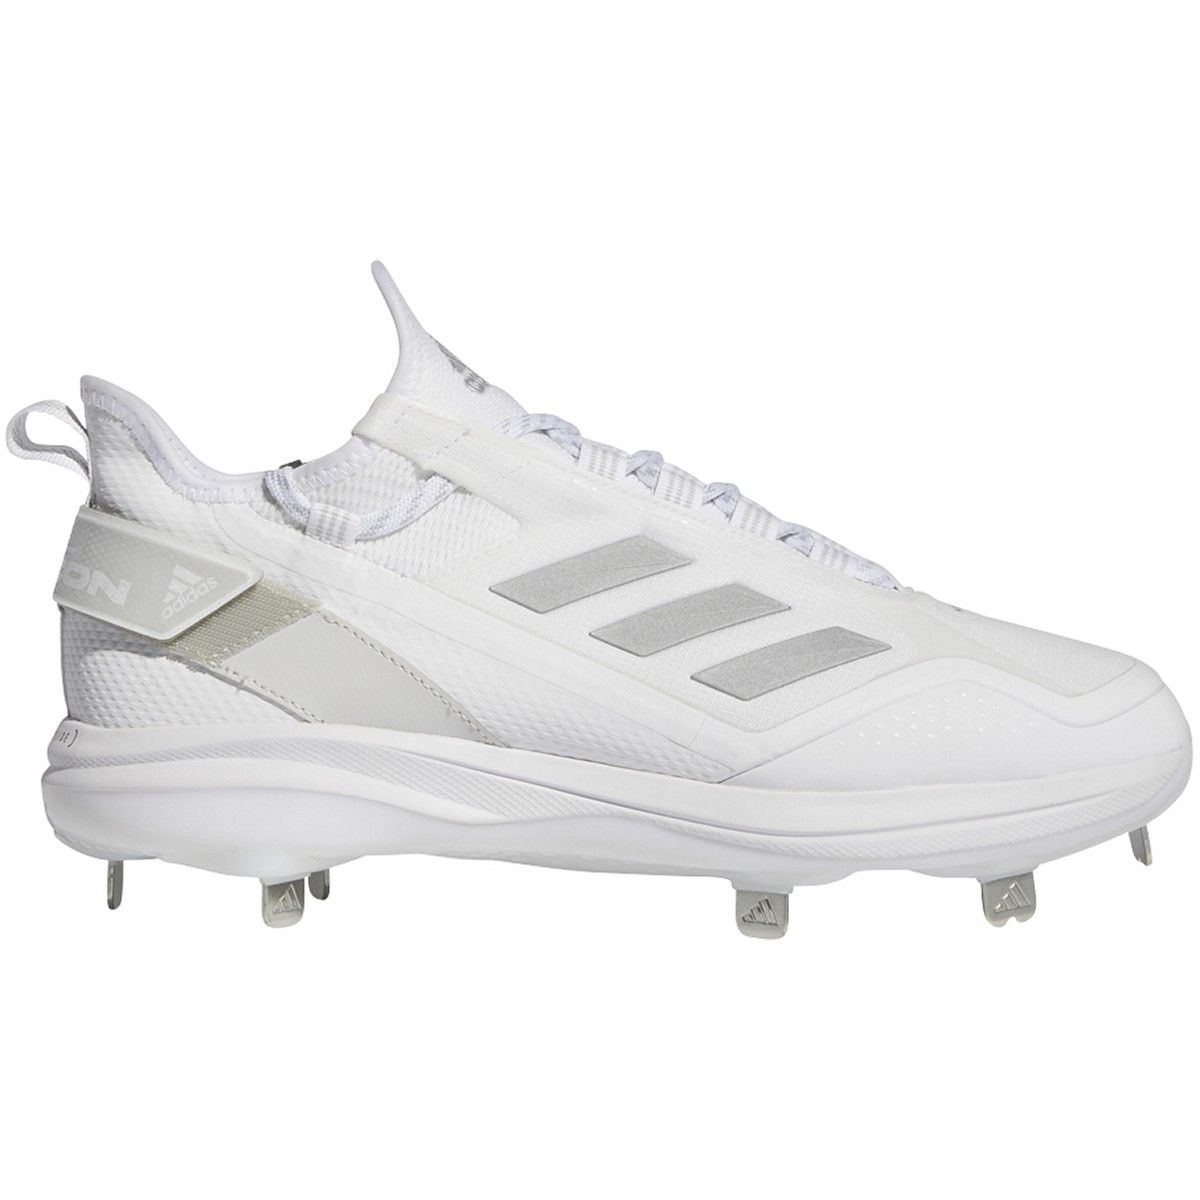 groef Giet Detector adidas Icon 7 Boost Cleat - Mens Baseball